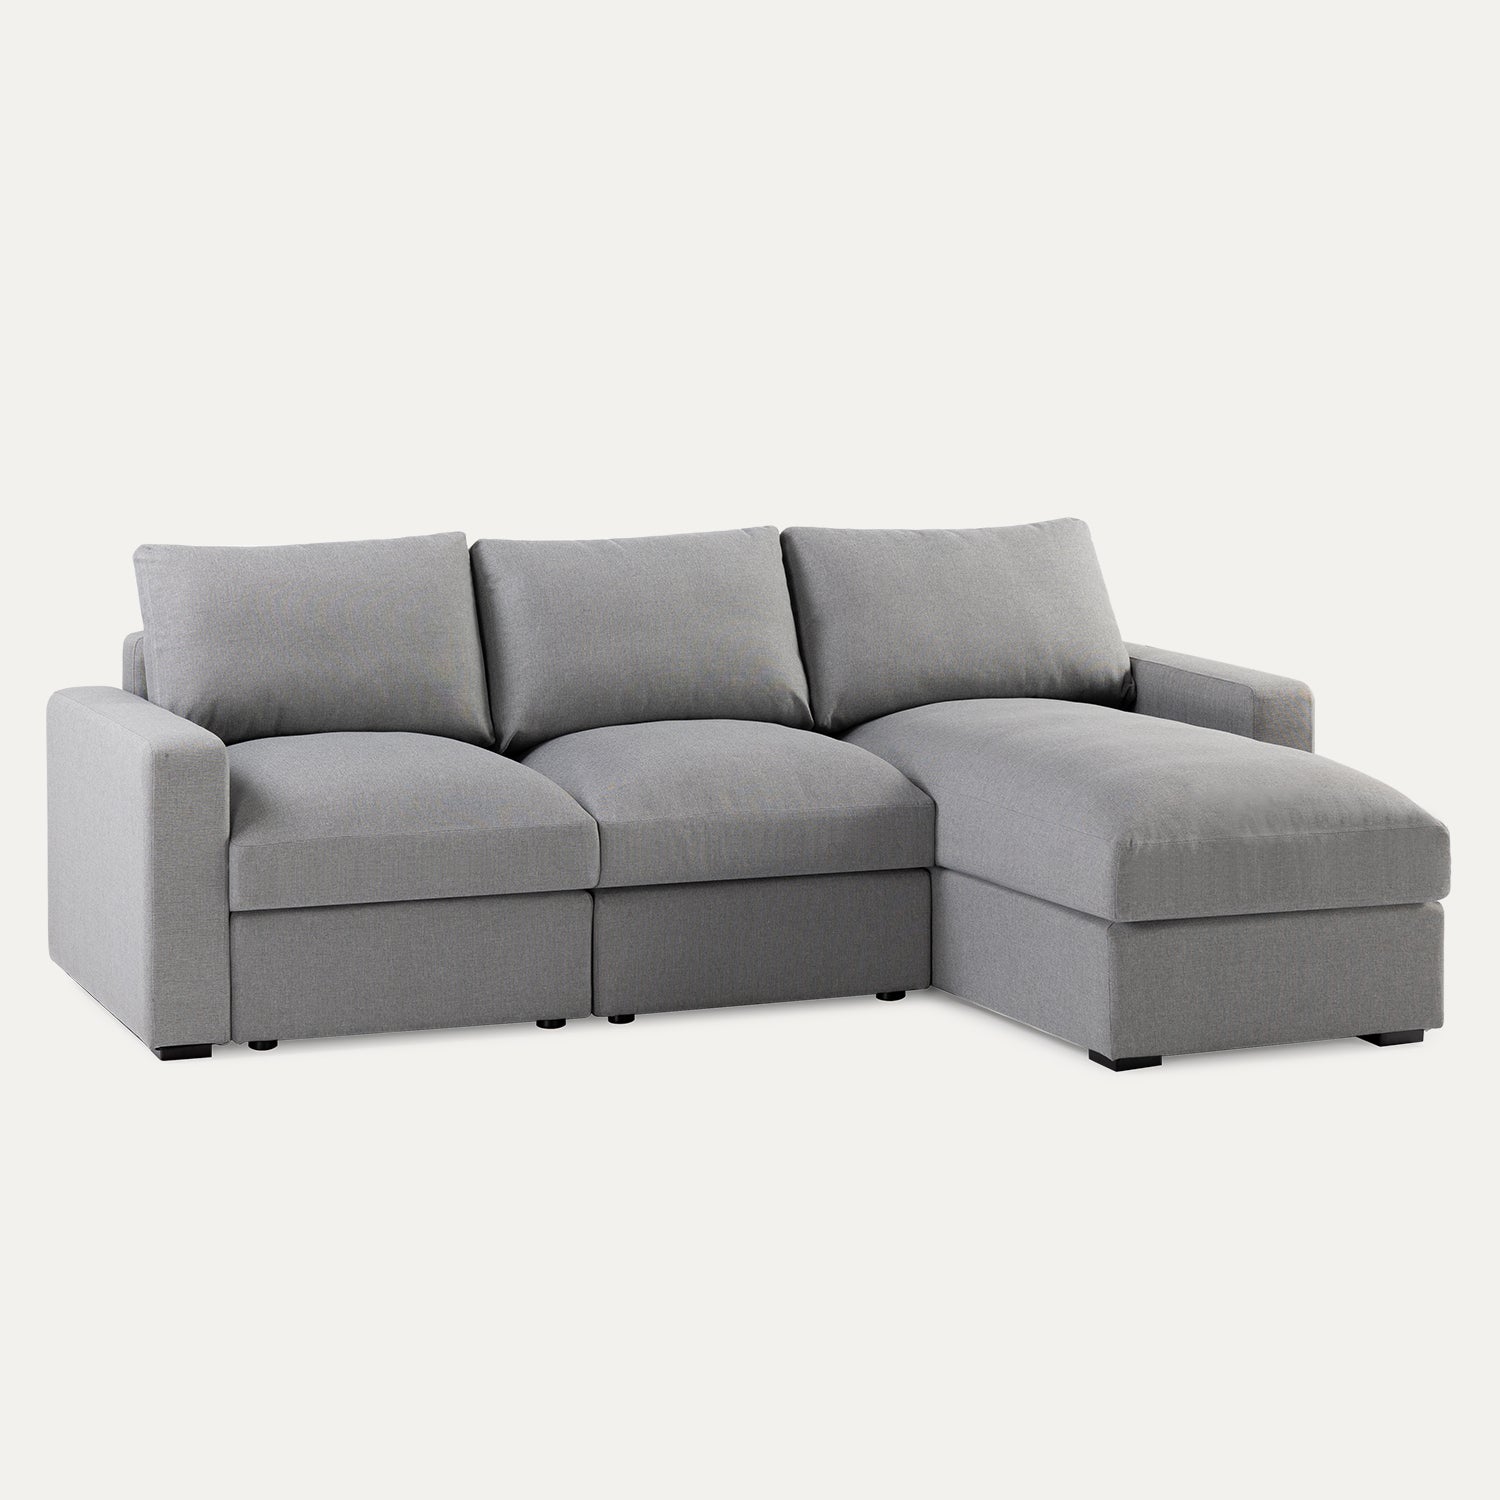 Jamison Reversible Chaise Sectional Sofa